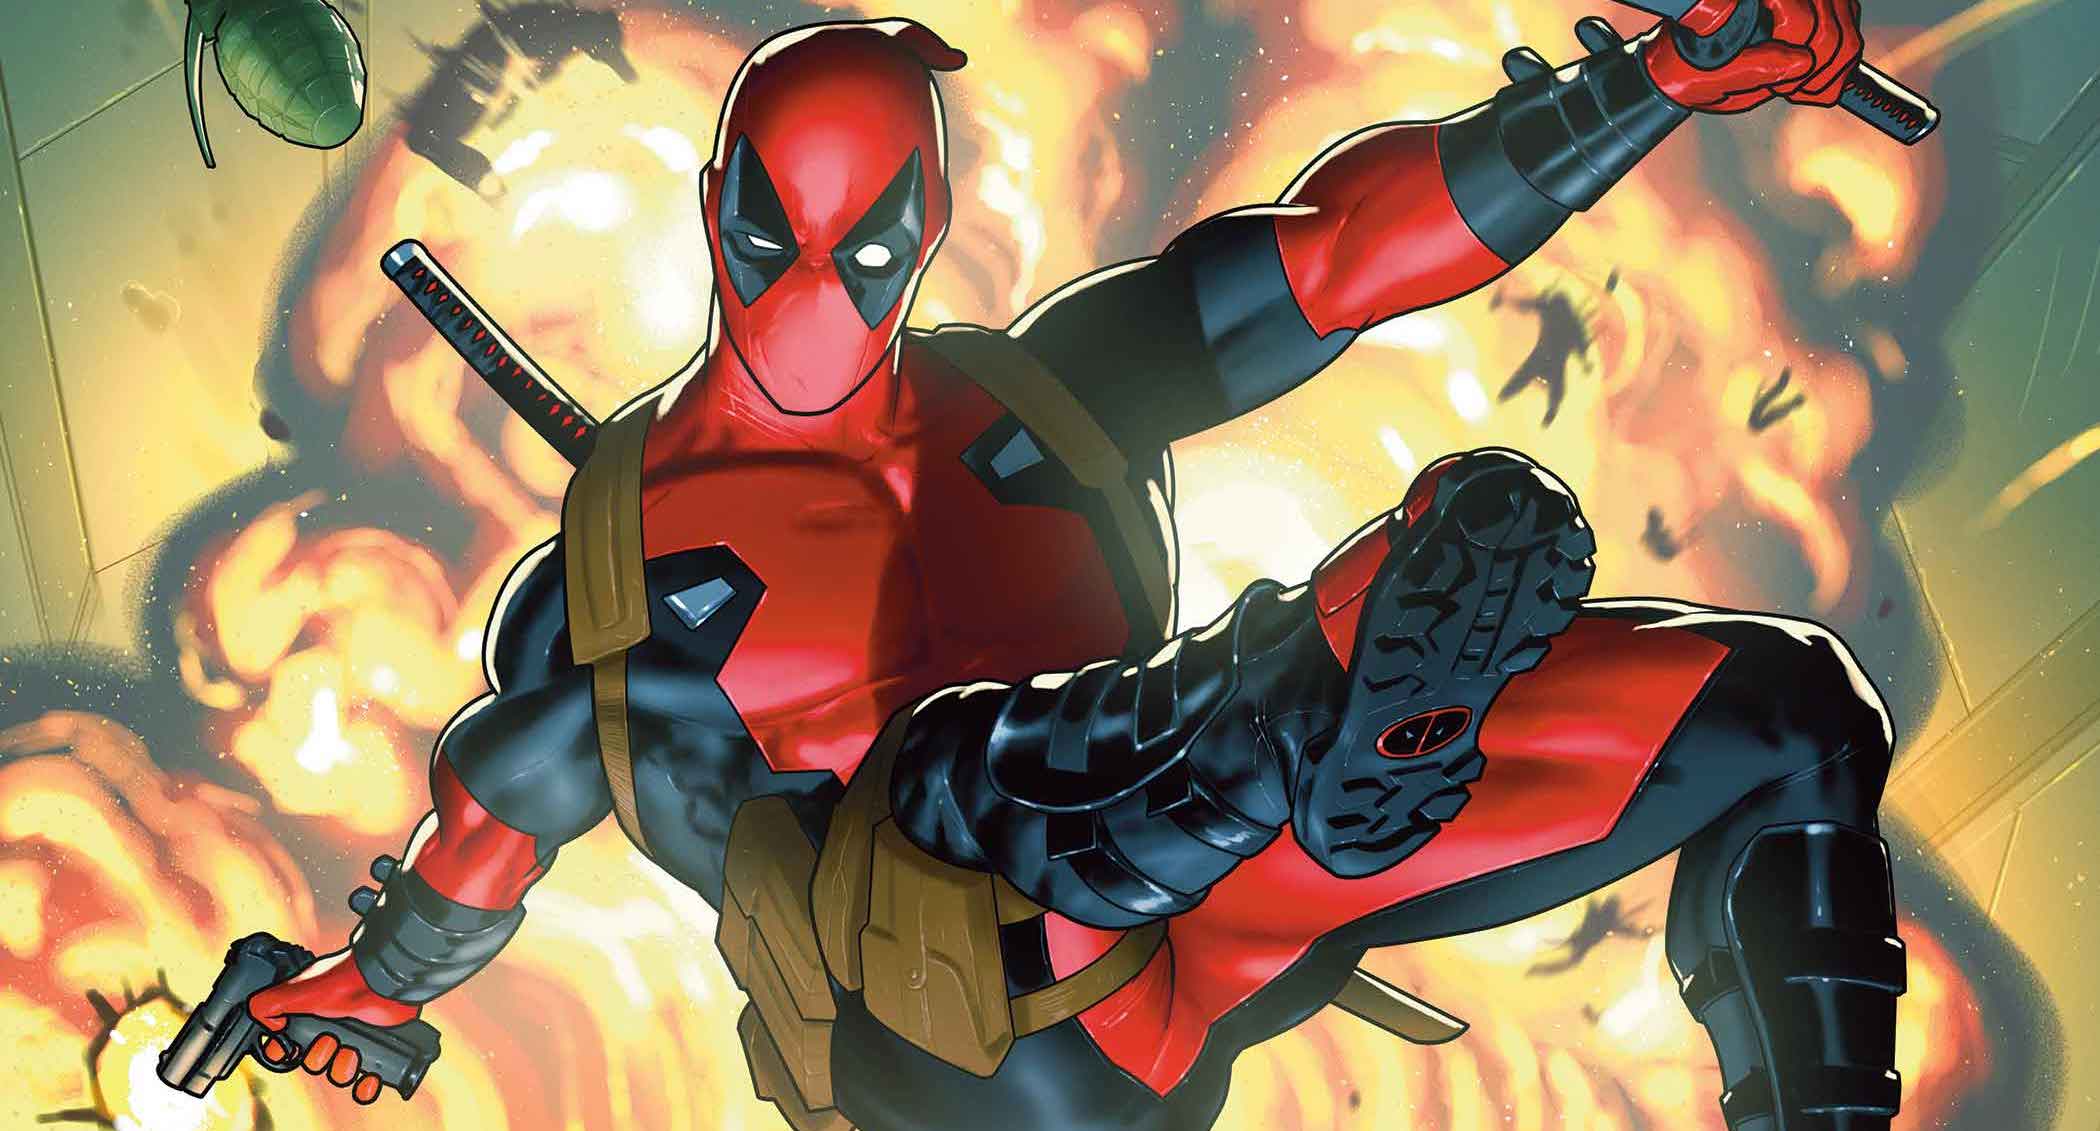 'Deadpool' #1 will please fans new and old